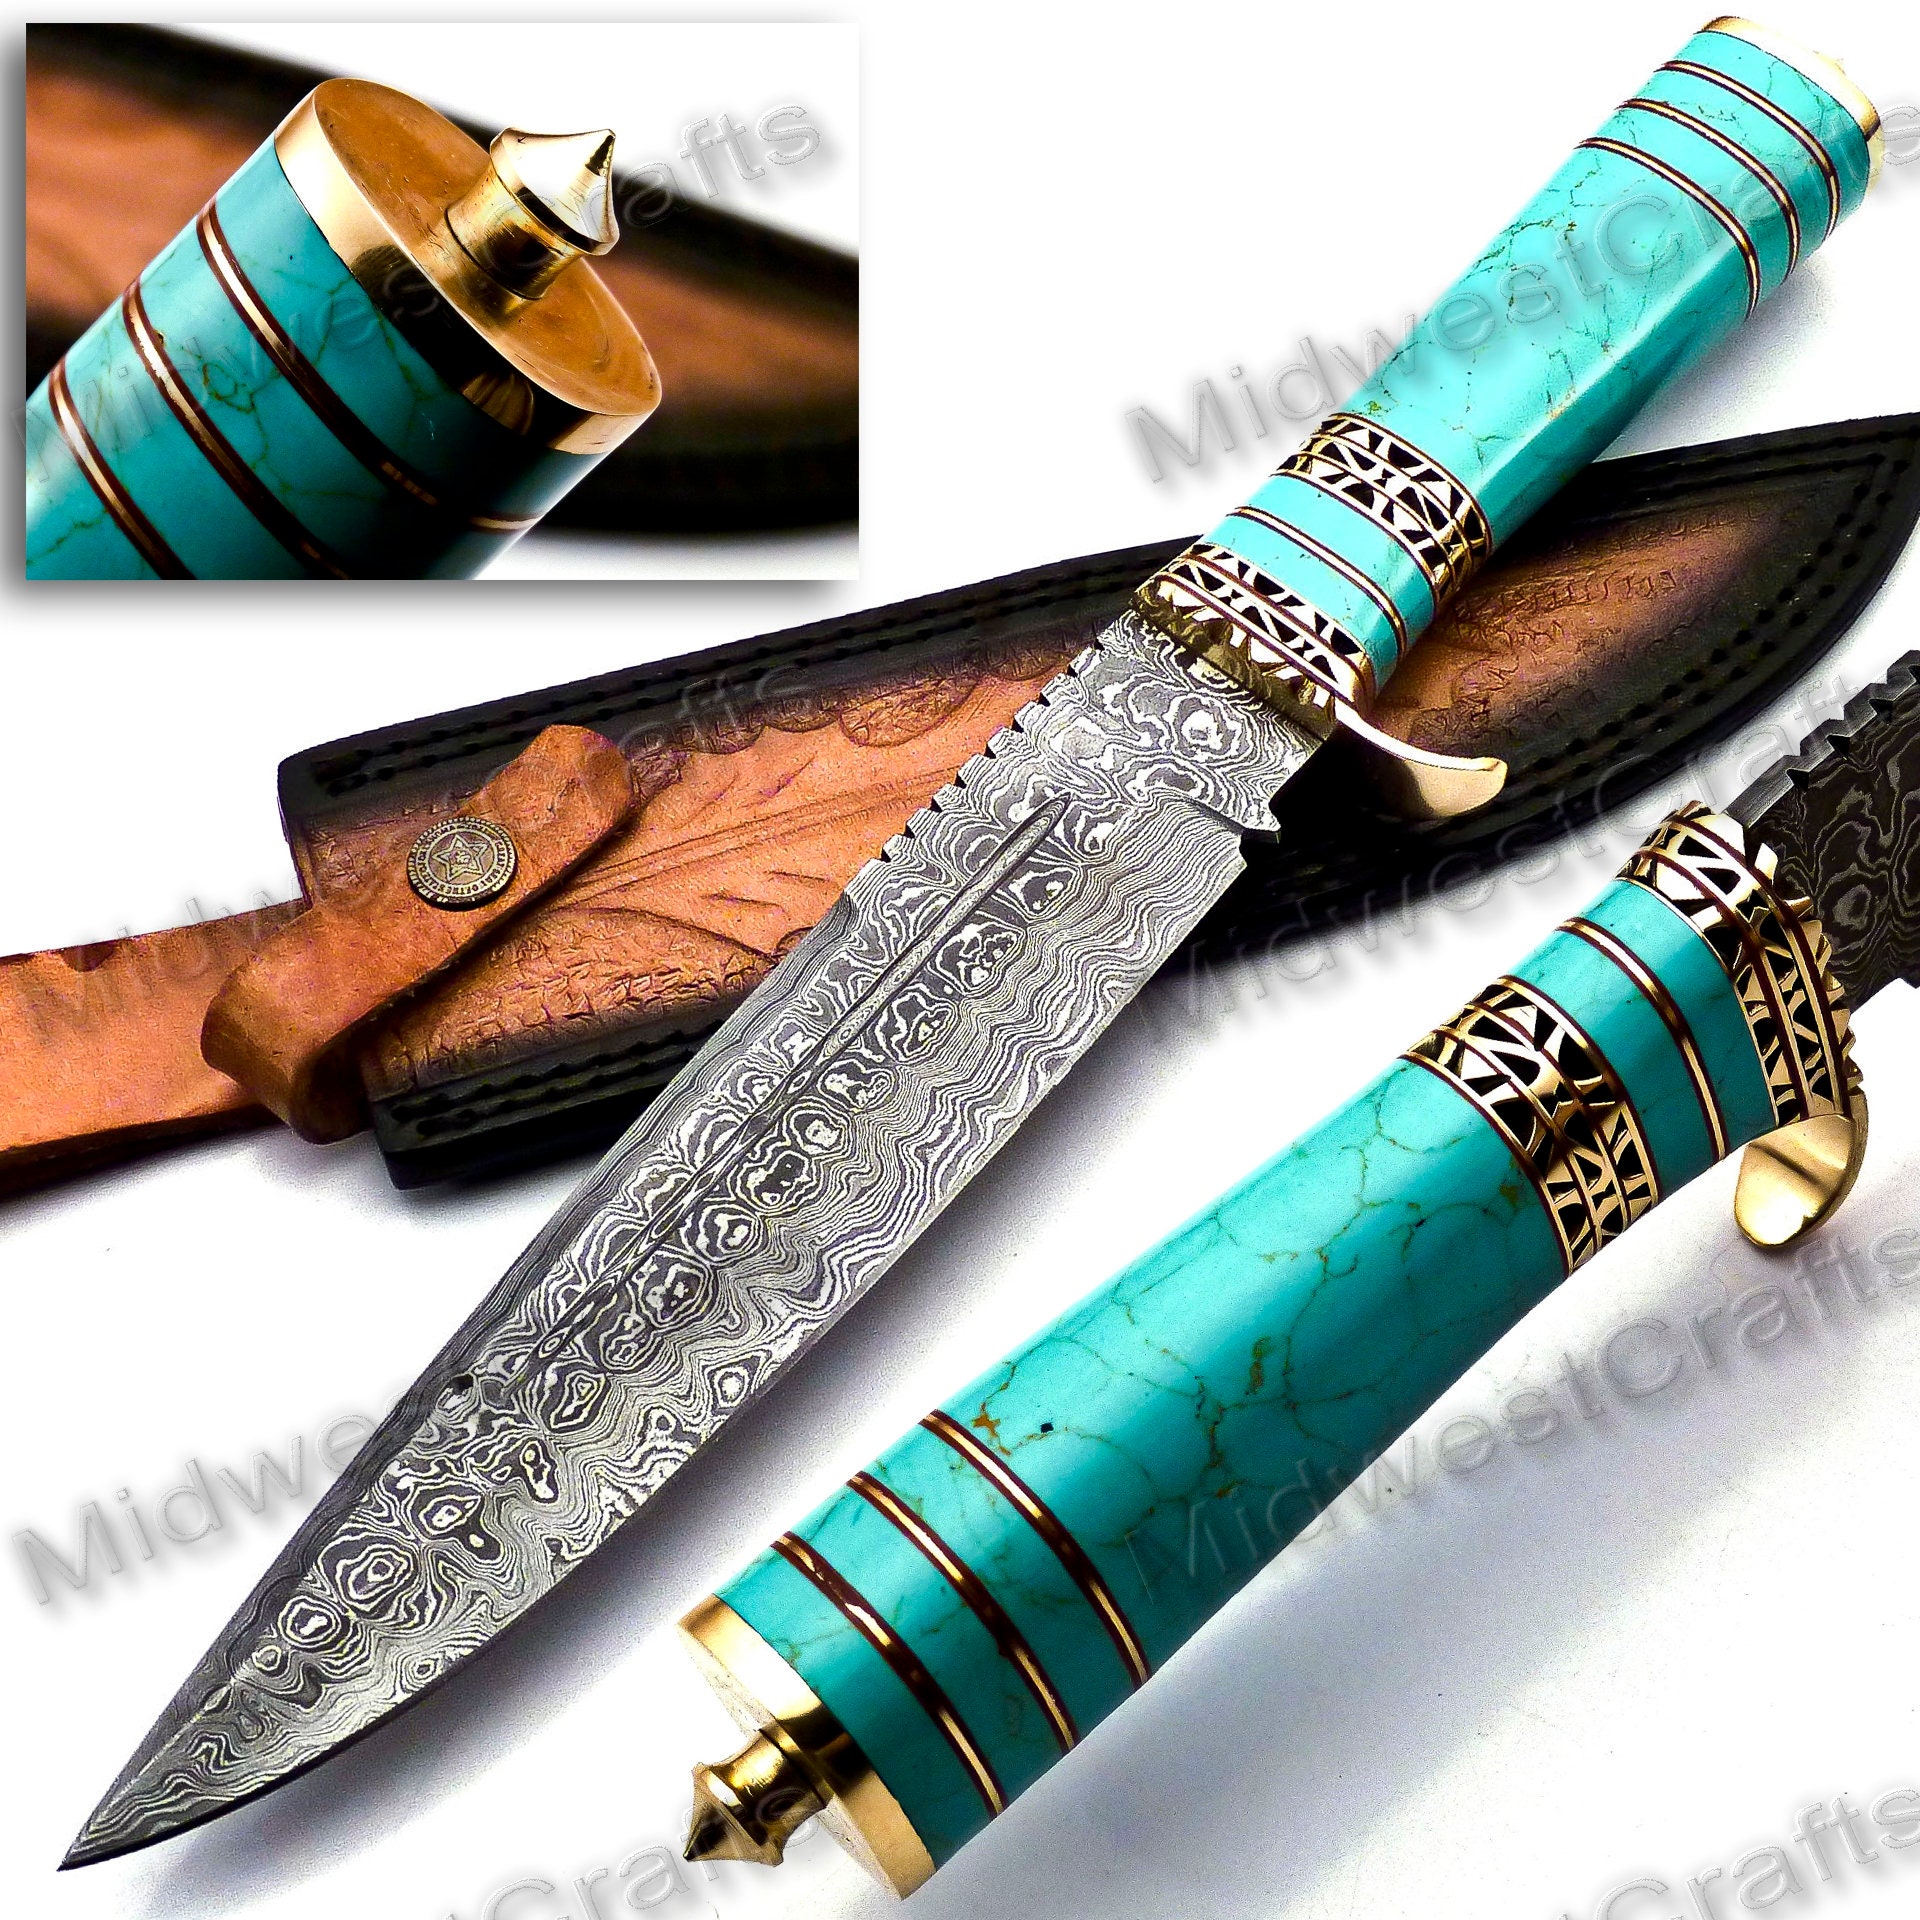 Handmade Damascus Steel 13.00 Inches Bowie Knife - turquoise stone & Bone  Handle